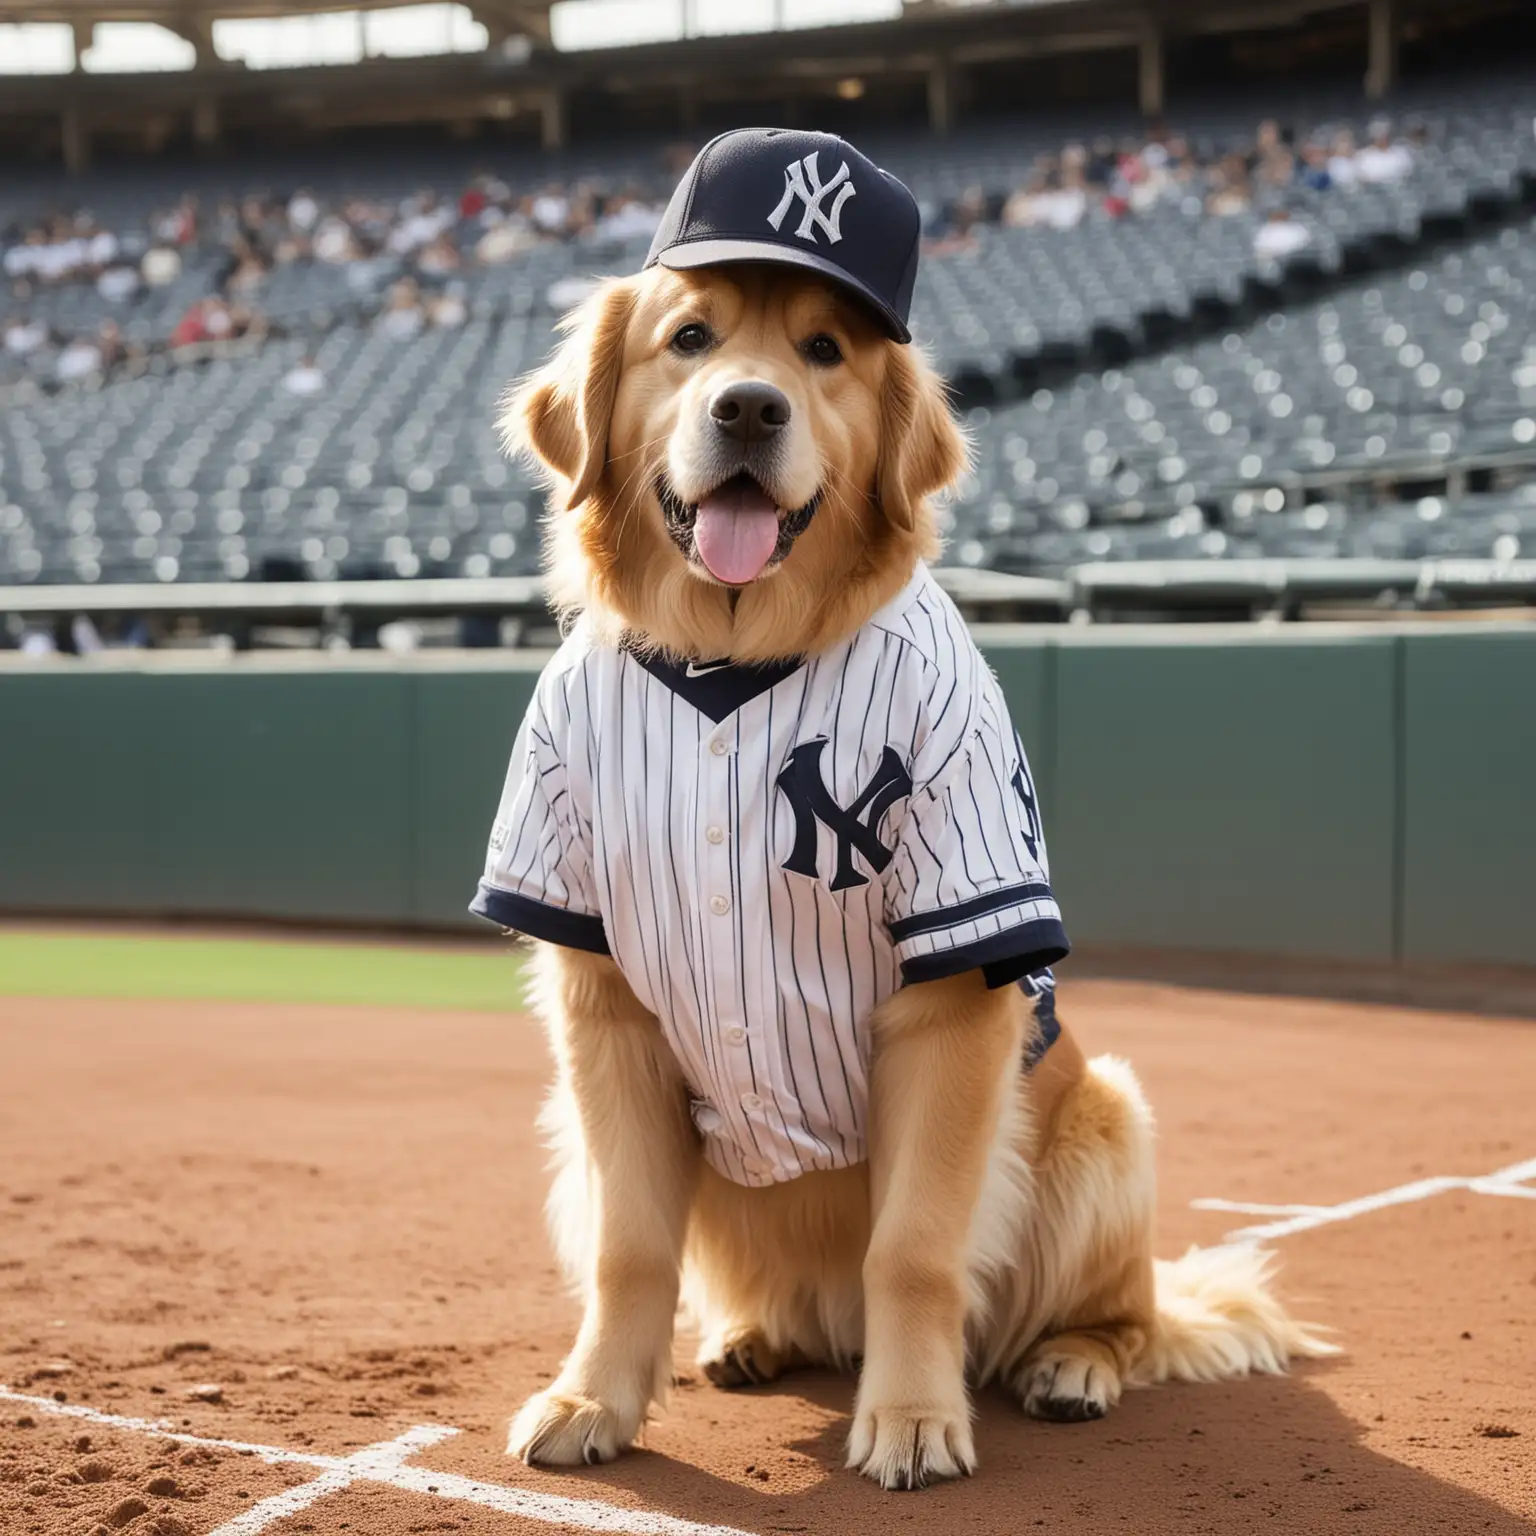 A golden retriever dressed in a New York Yankees uniform, standing in a baseball stadium ready to hit a pitch, holding a bat, with a matching team cap on; capture the poised moment right before the swing.